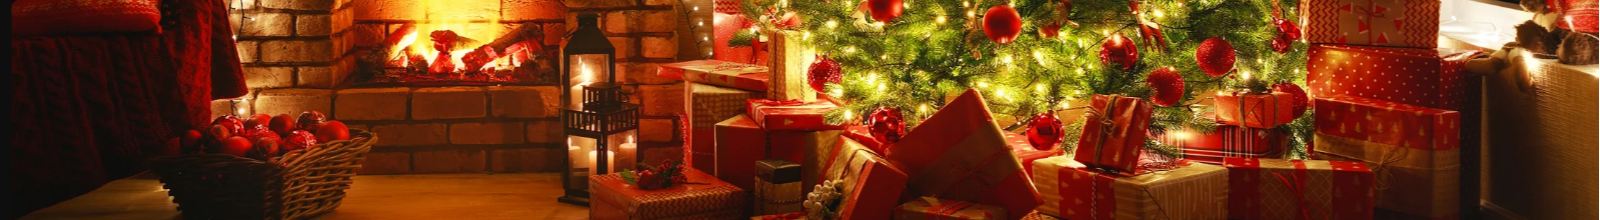 christmas scene with a lit tree, fire in the fire place and presents wrapped in red paper under the tree